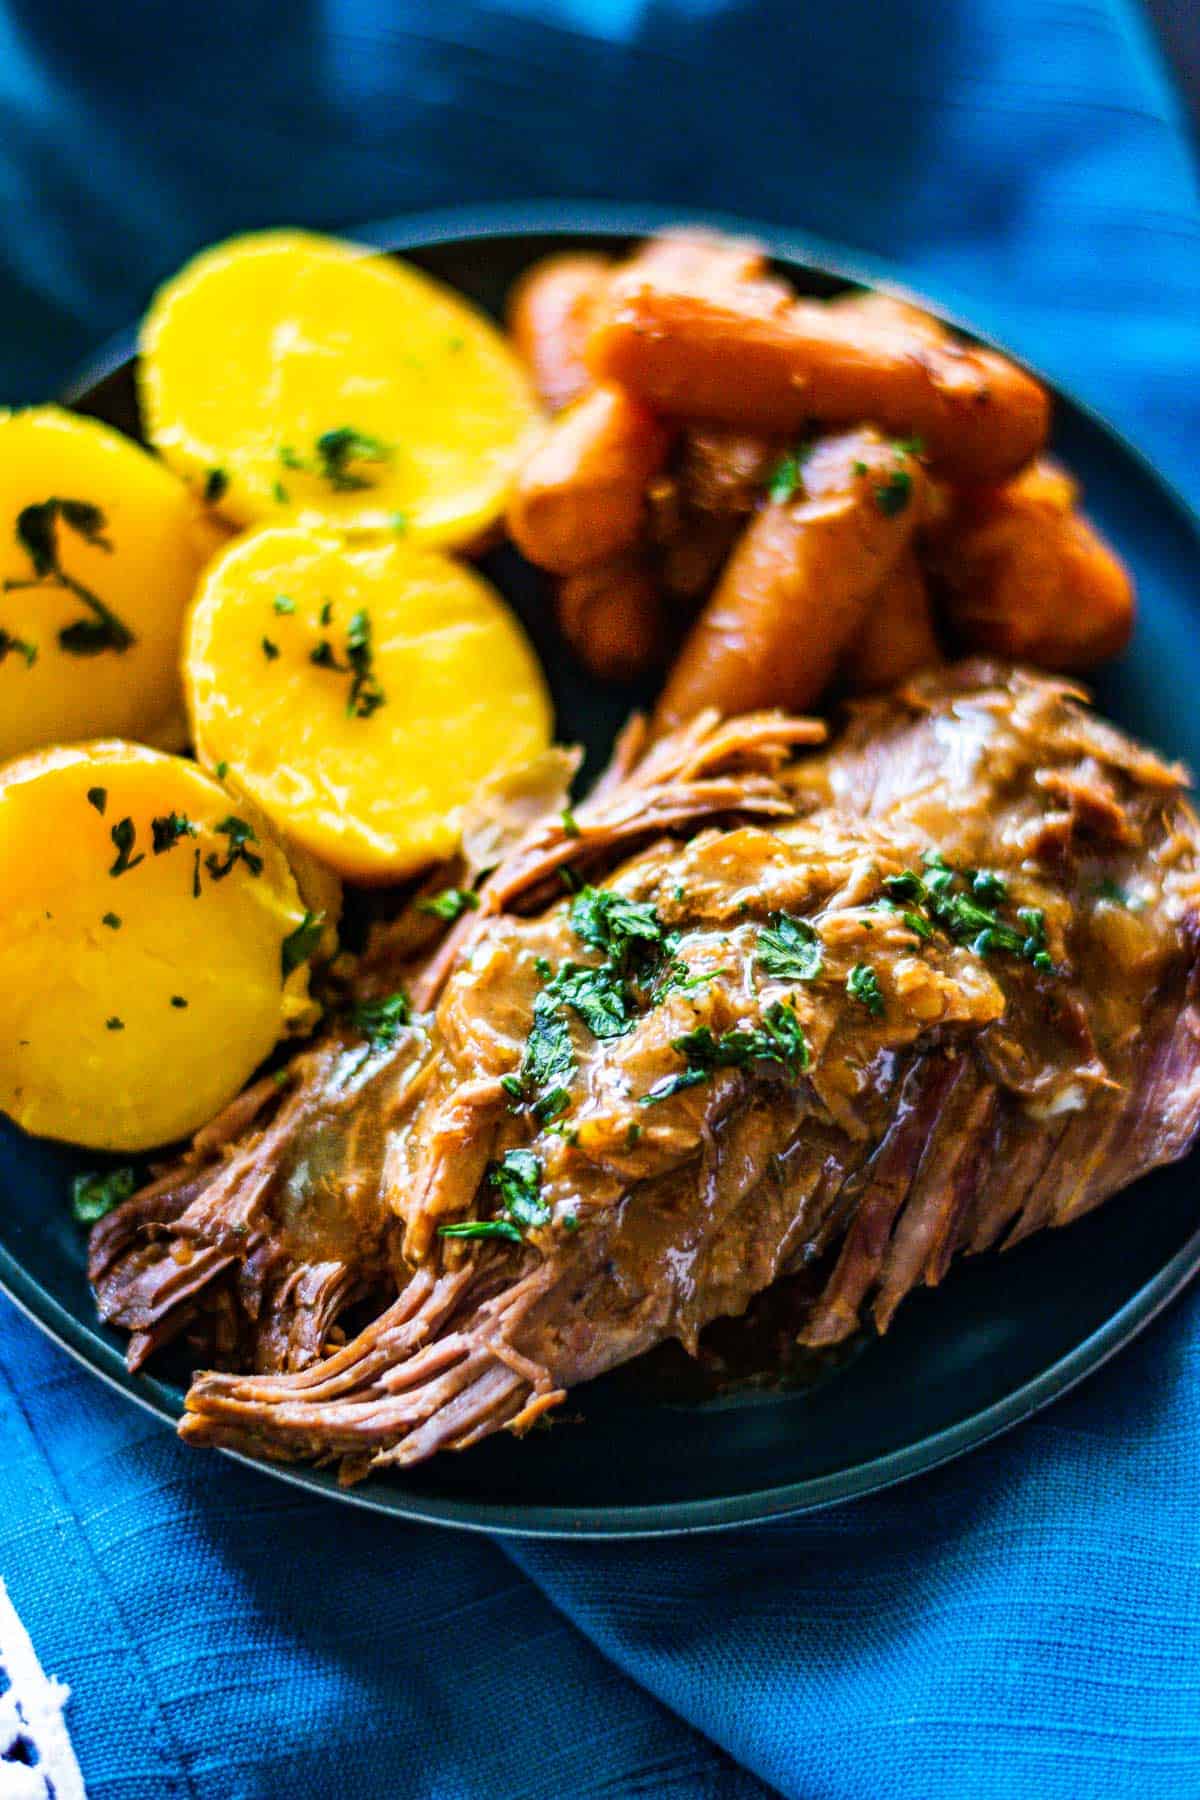 Slices pot roast with gravy on a blue plate with sliced potatoes and carrots.